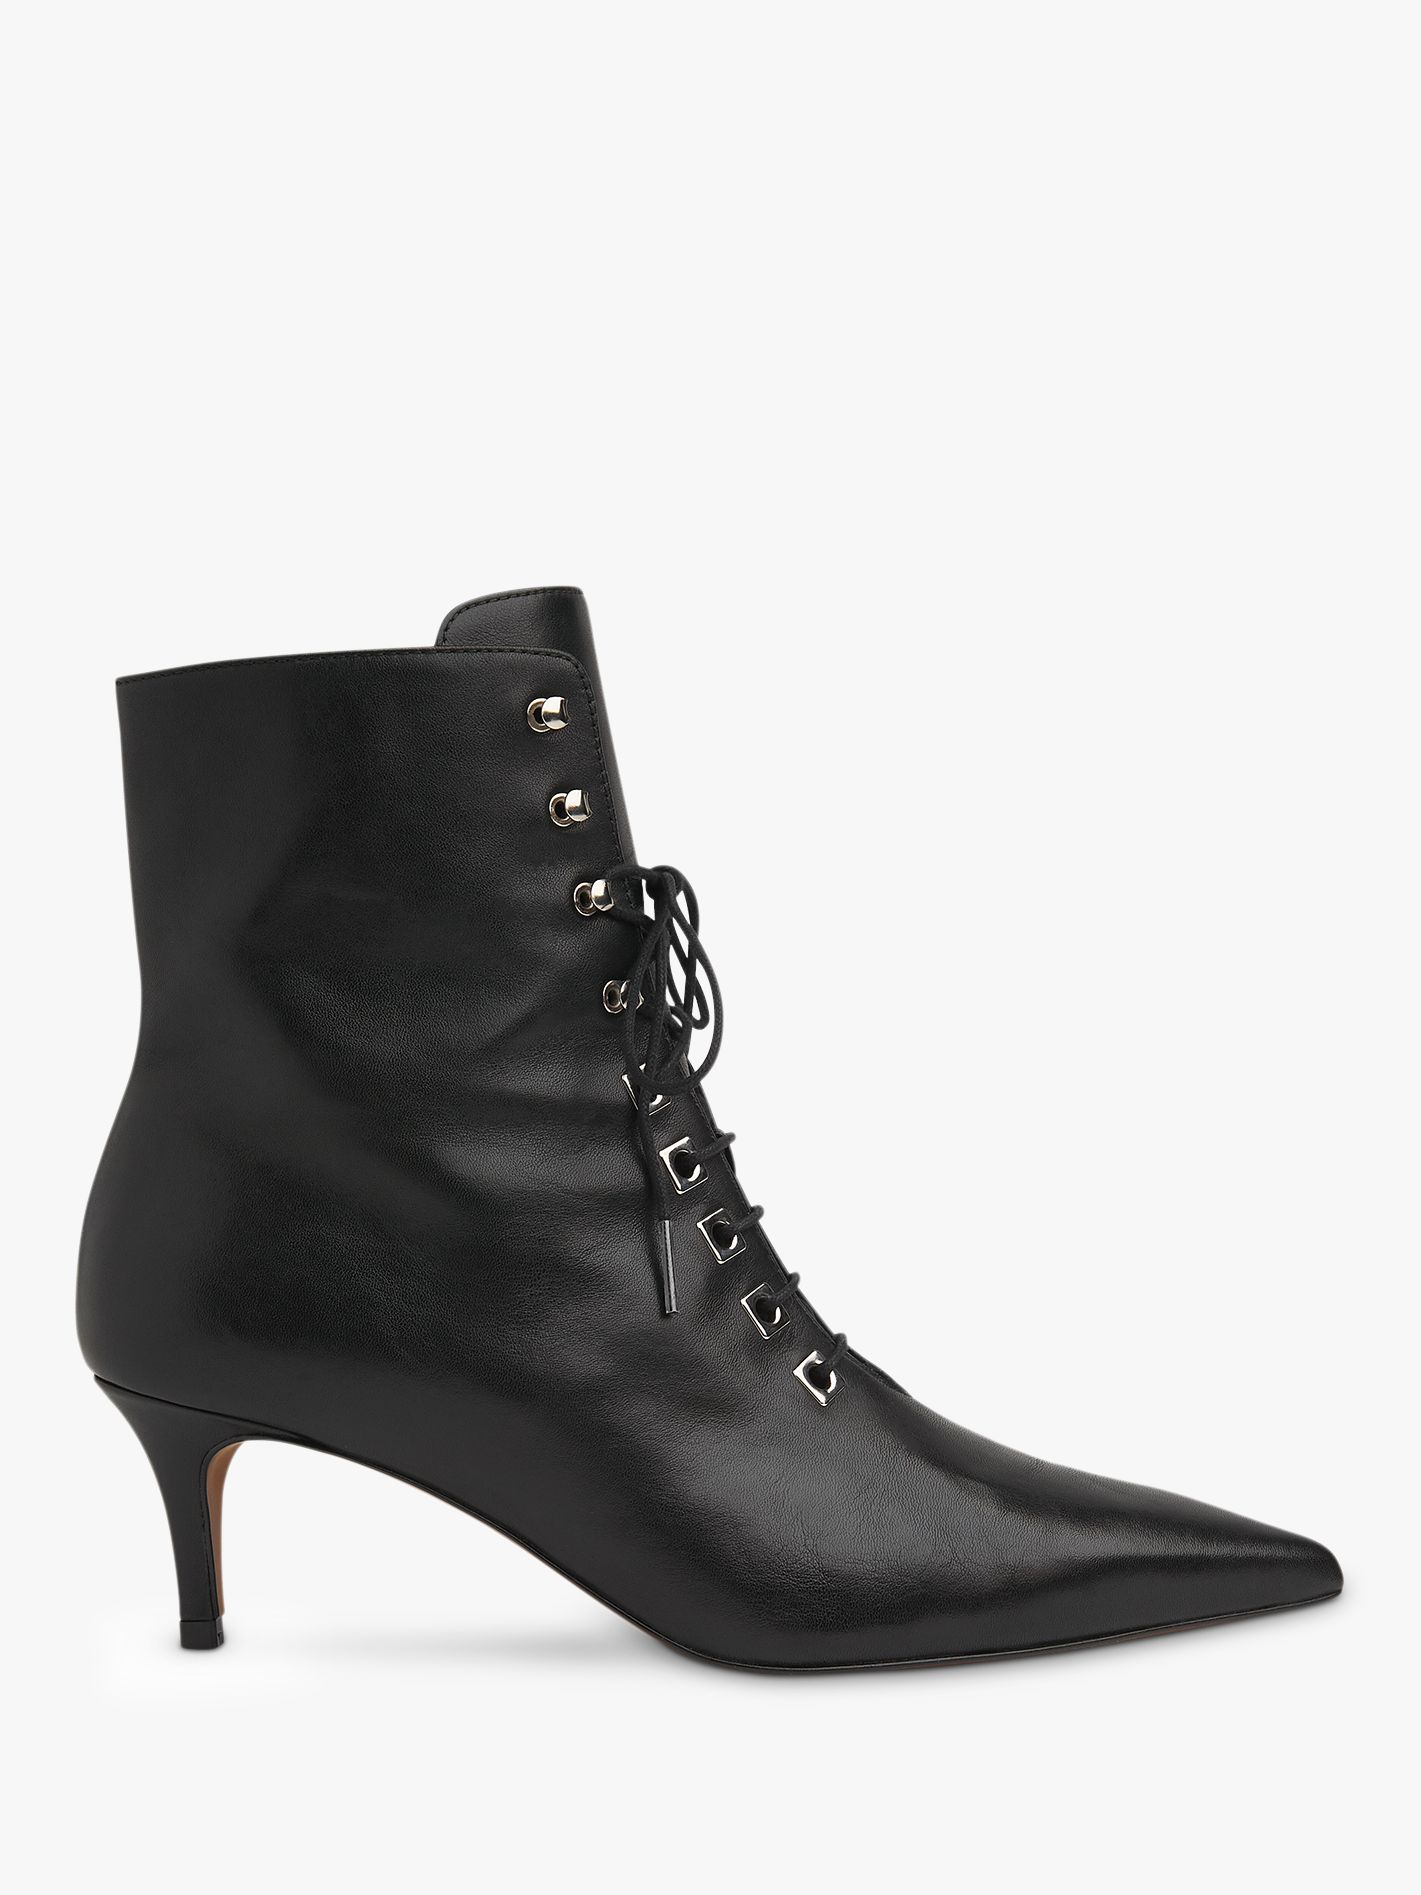 Whistles Celeste Kitten Heel Lace Up Ankle Boots, Black Leather at John